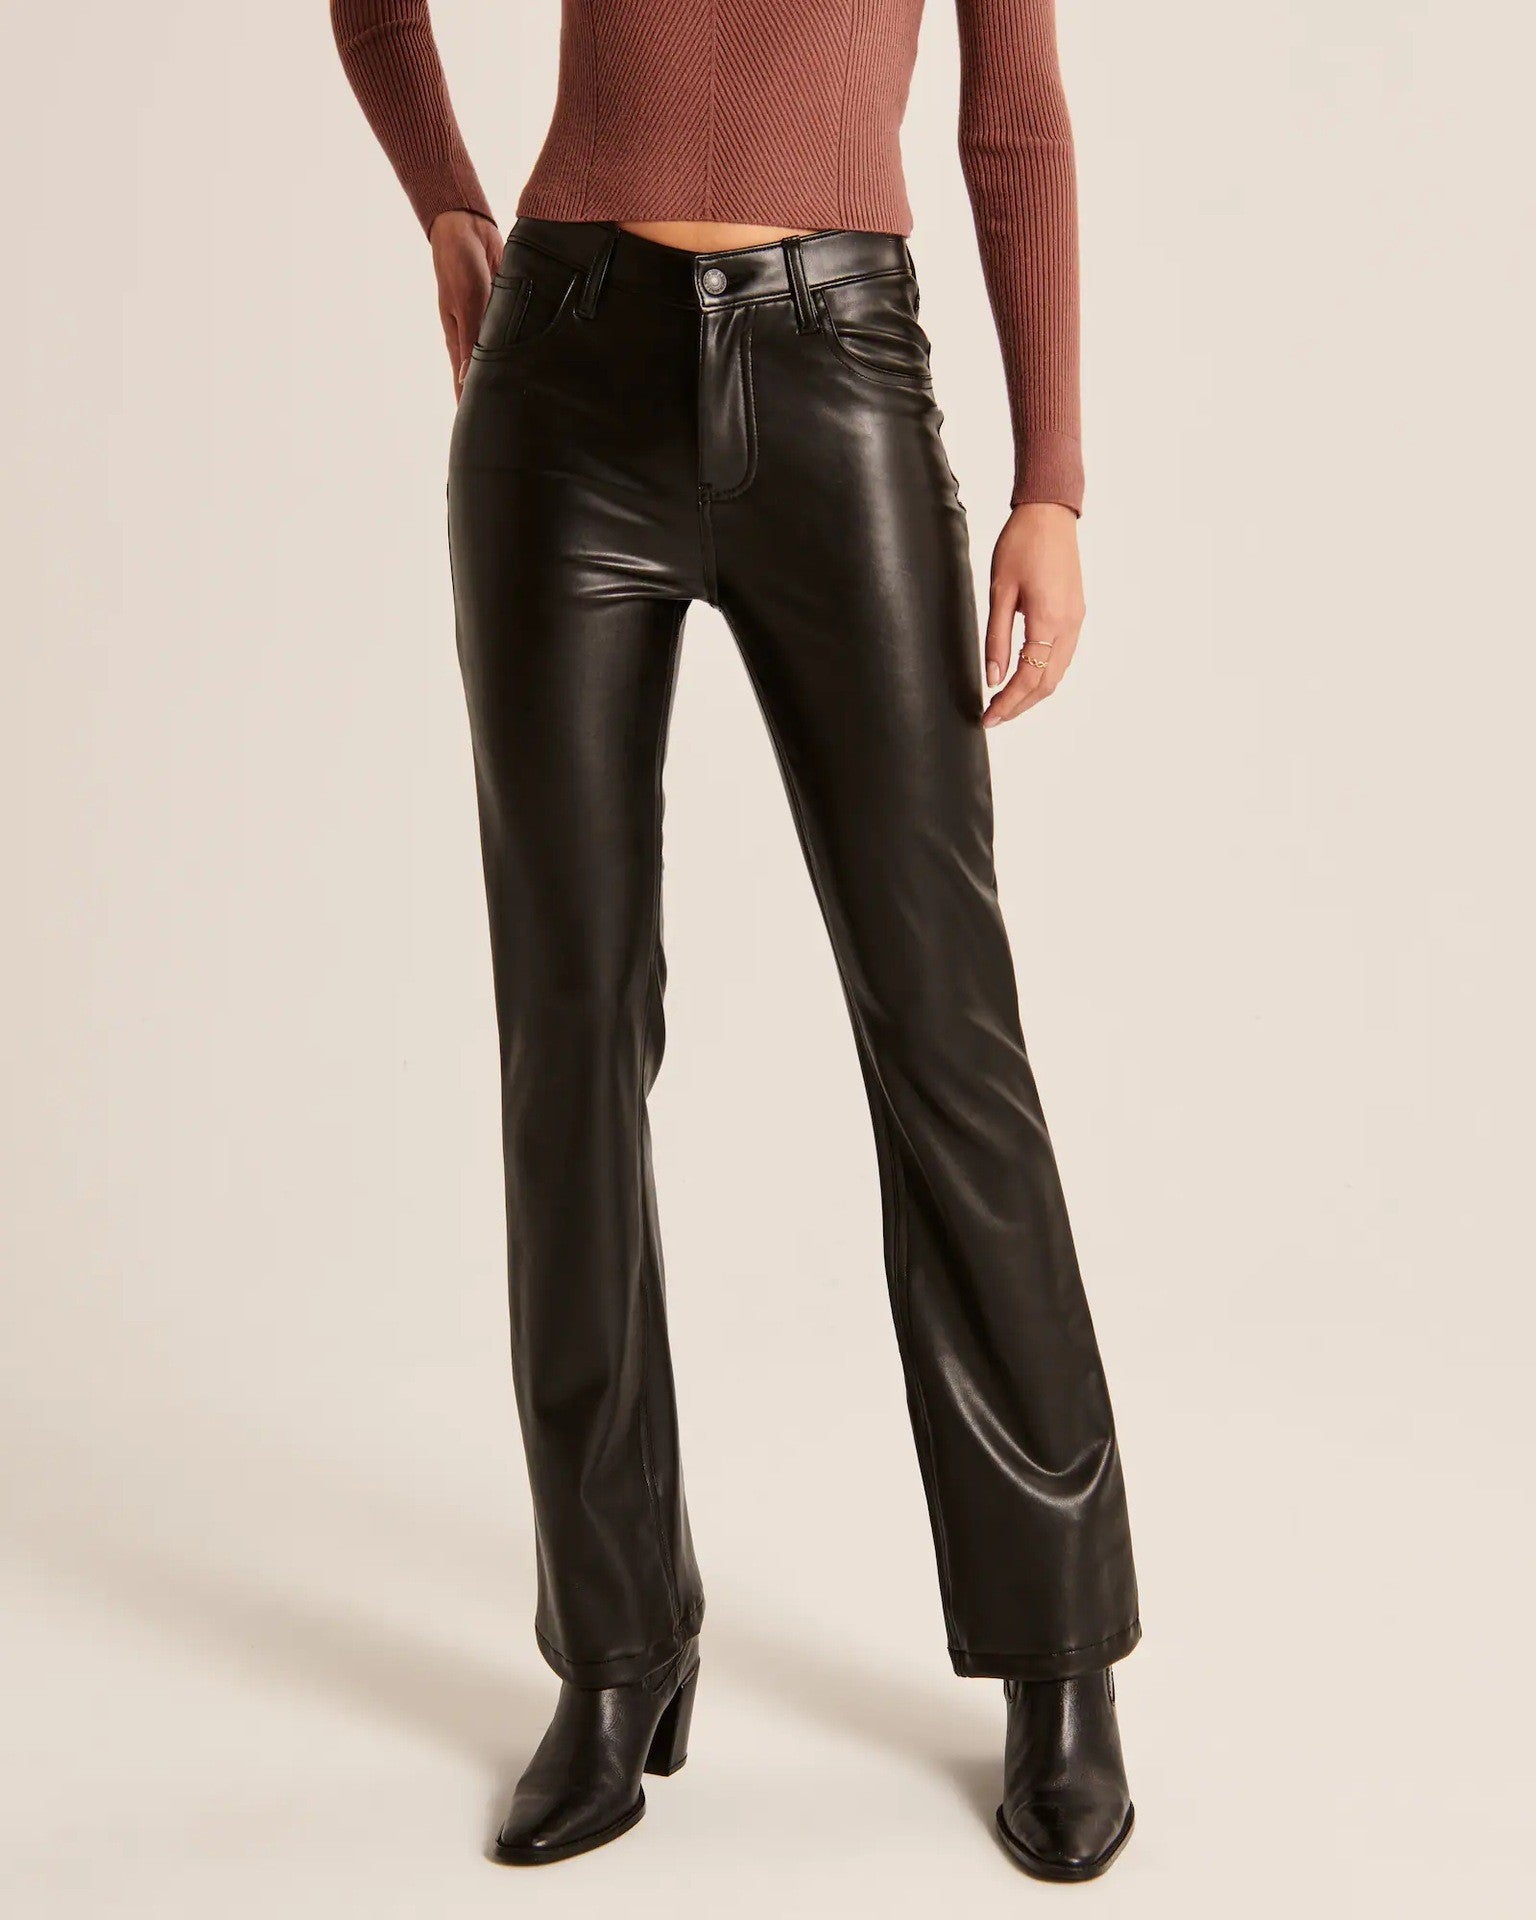 Women's Straight Leather Long Casual Low Waist Pants